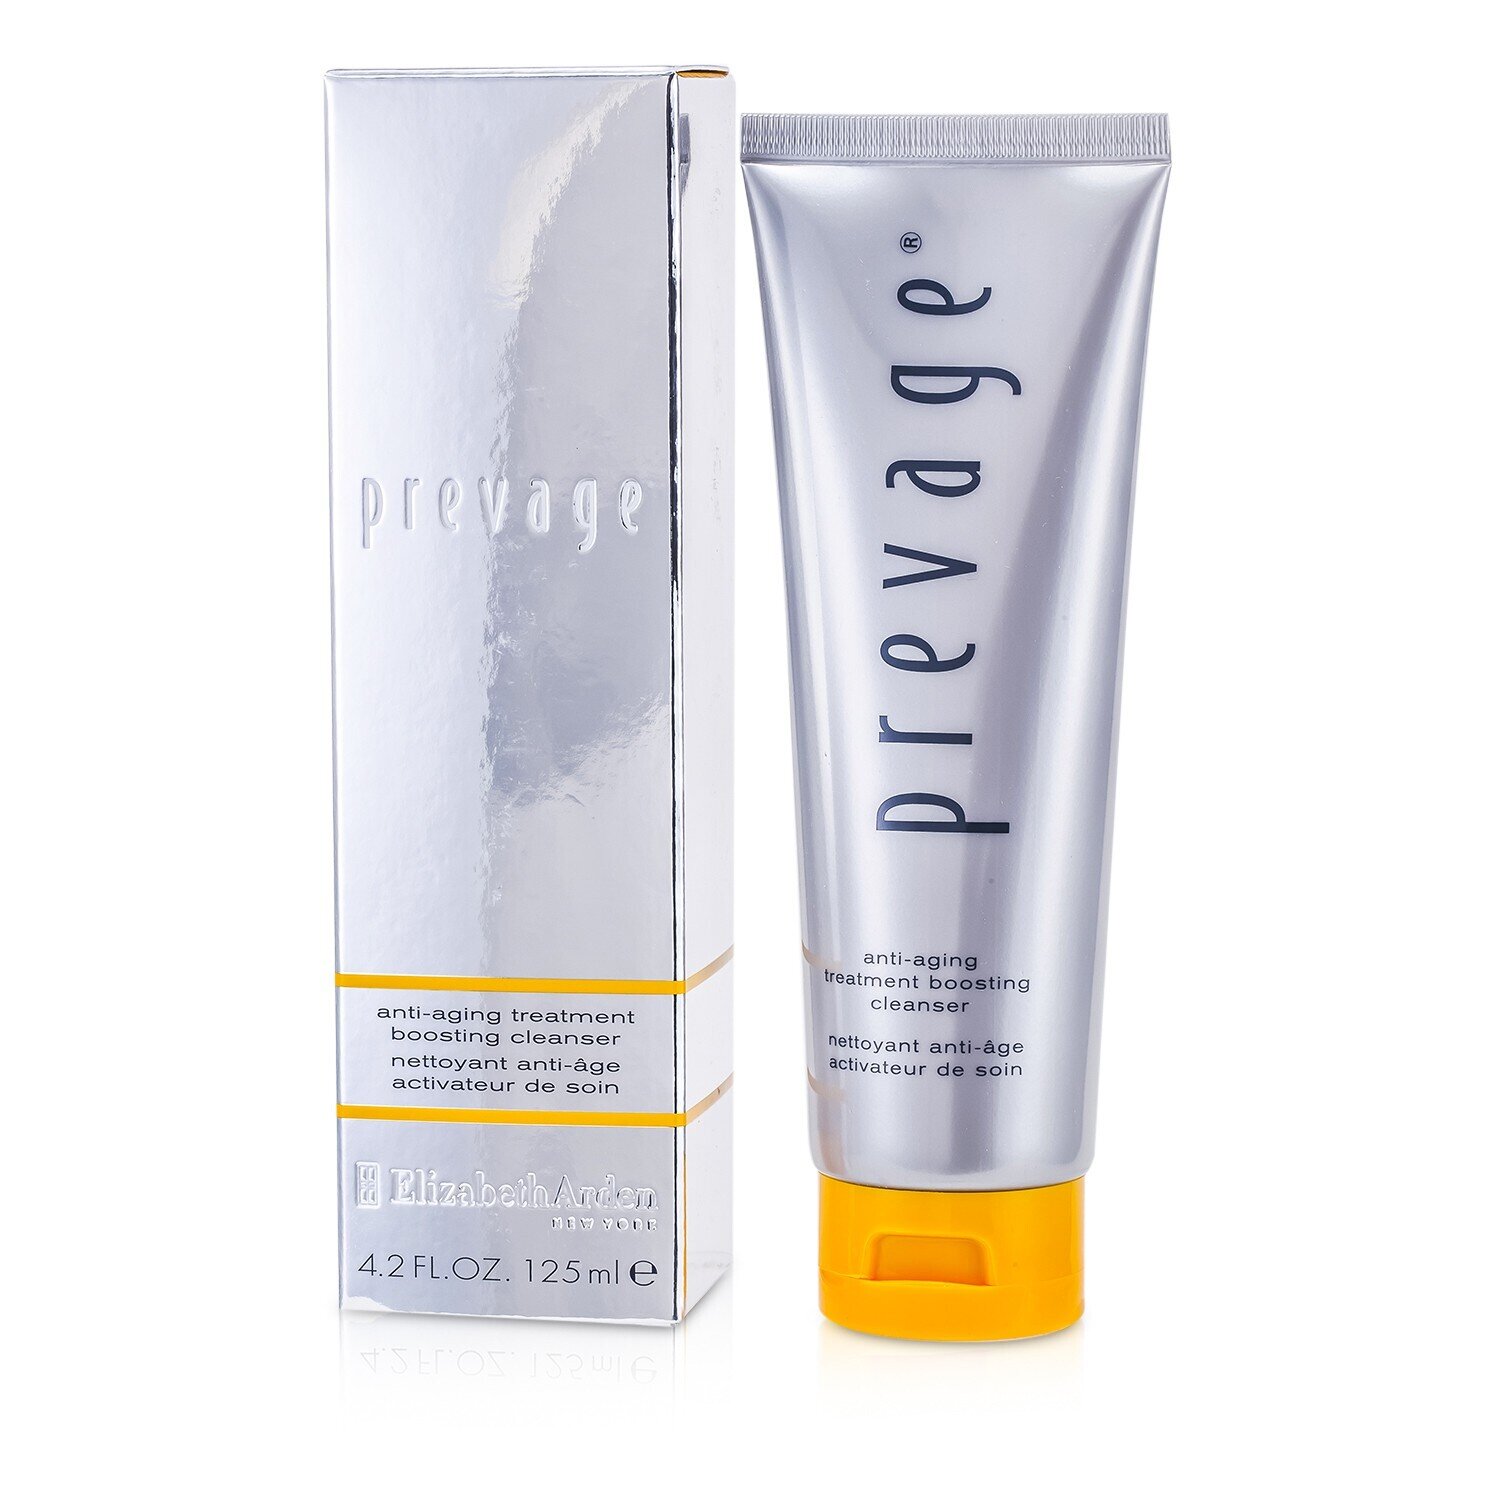 Photos - Facial / Body Cleansing Product Elizabeth Arden PREVAGE Anti-Aging Treatment Boosting Cleanser 